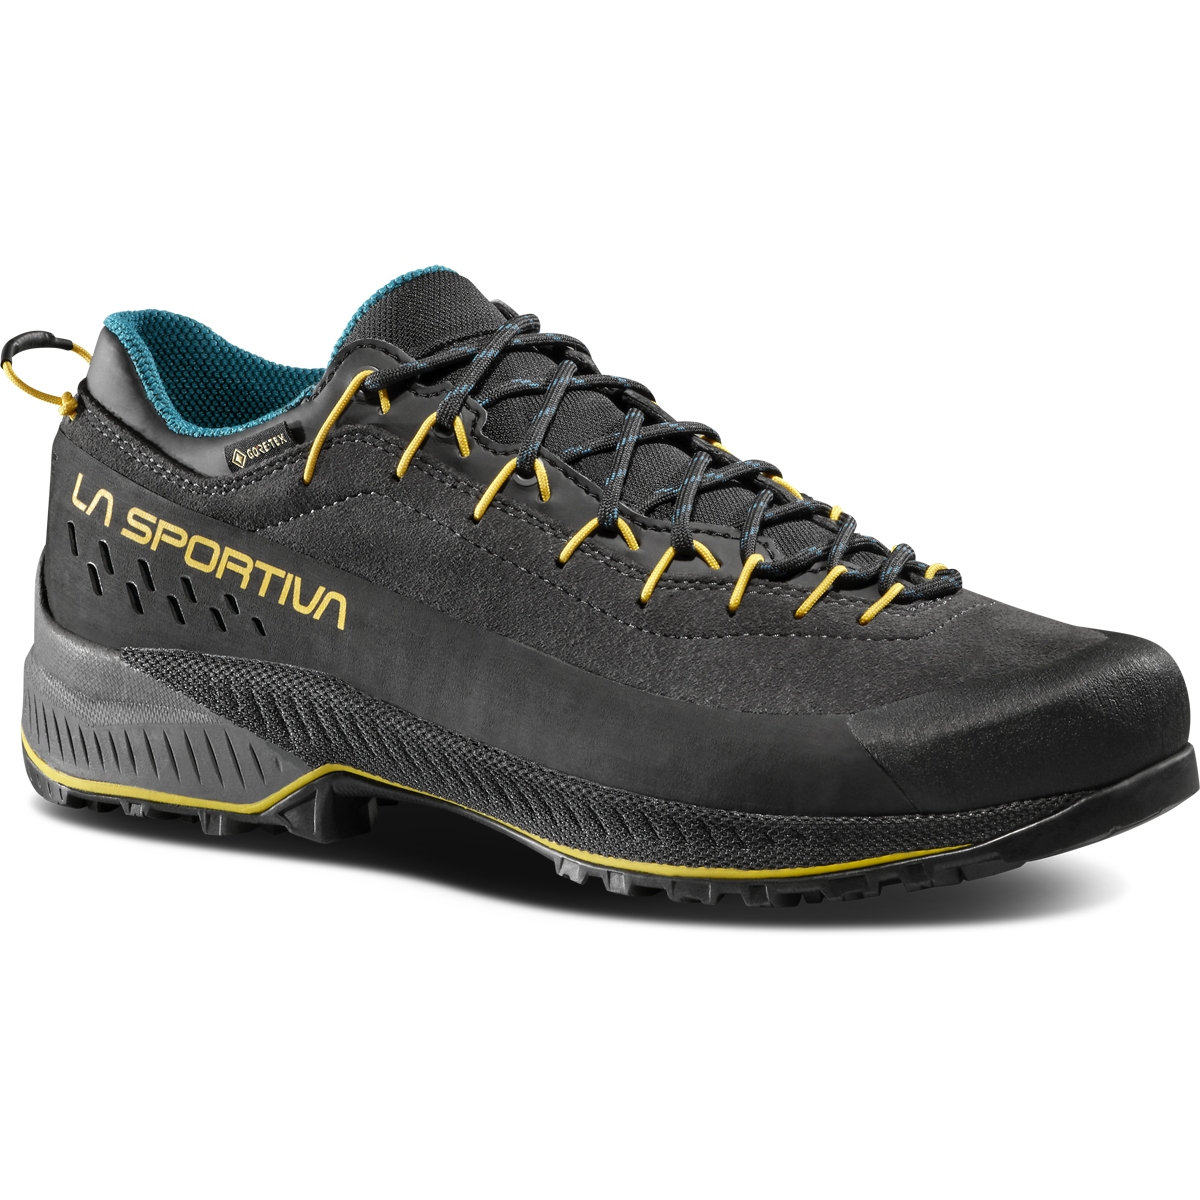 Picture of La Sportiva TX4 Evo GTX Approach Shoes Men - Carbon/Bamboo